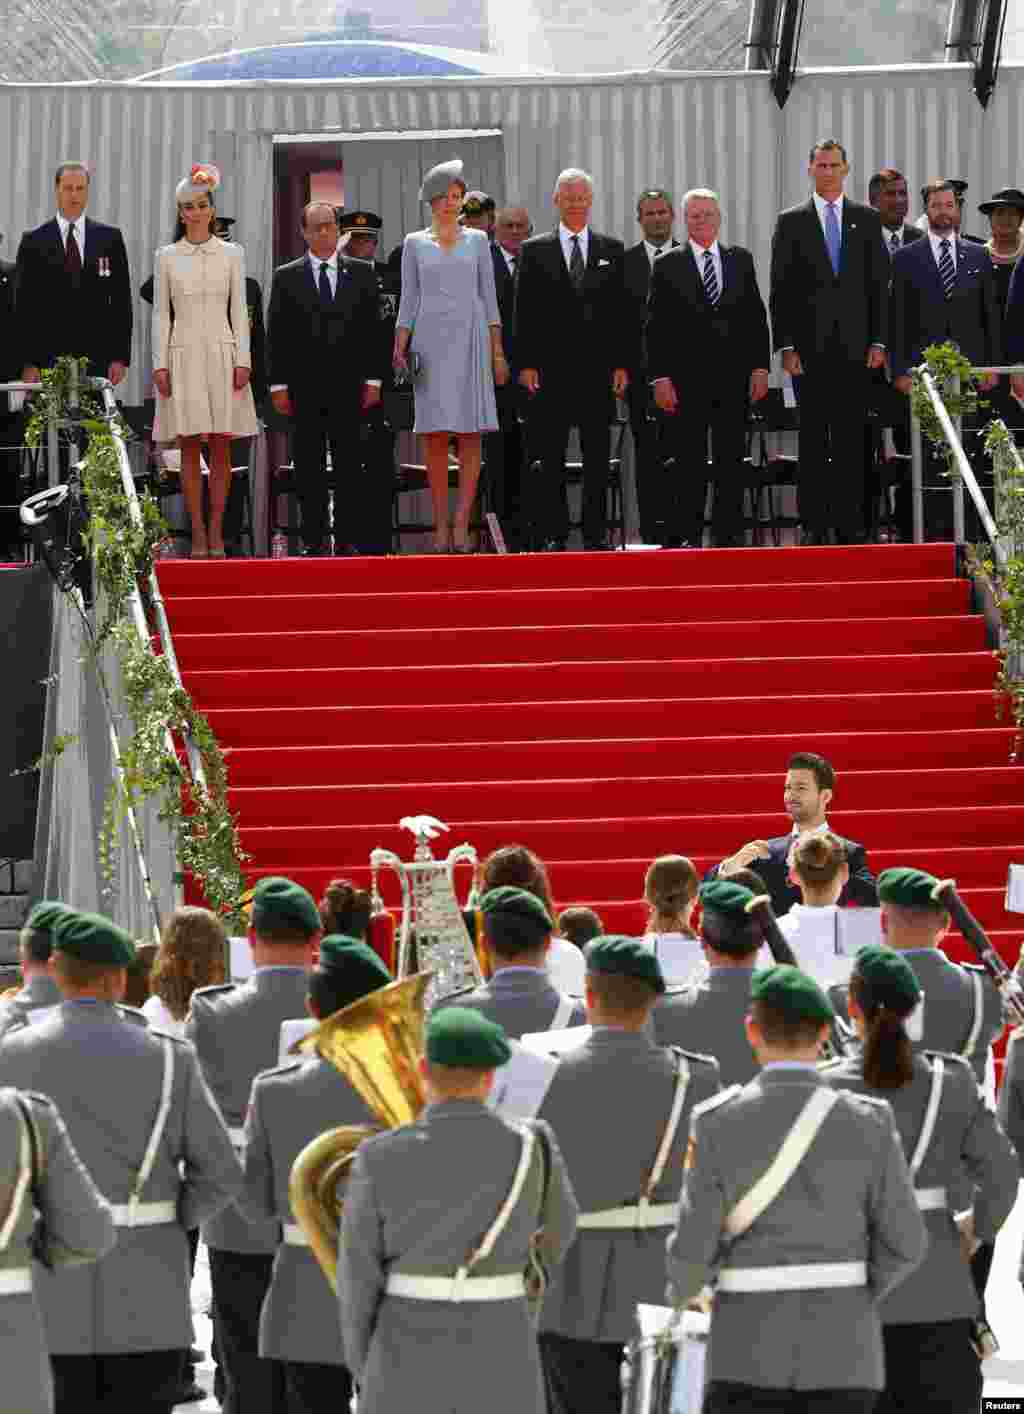 Left to right, Great Britain Prince William, his wife Catherine, Duchess of Cambridge, French President Francois Hollande, Belgian Queen Mathilde and King Philippe, German President Joachim Gauck, Spanish King Felipe and Luxembourg Hereditary Grand-Duke Prince Guillaume attend a ceremony at the Cointe Inter-allied Memorial, commemorating the 100th anniversary of the outbreak of World War I (WWI) in Liege, Belgium, Aug. 4, 2014.